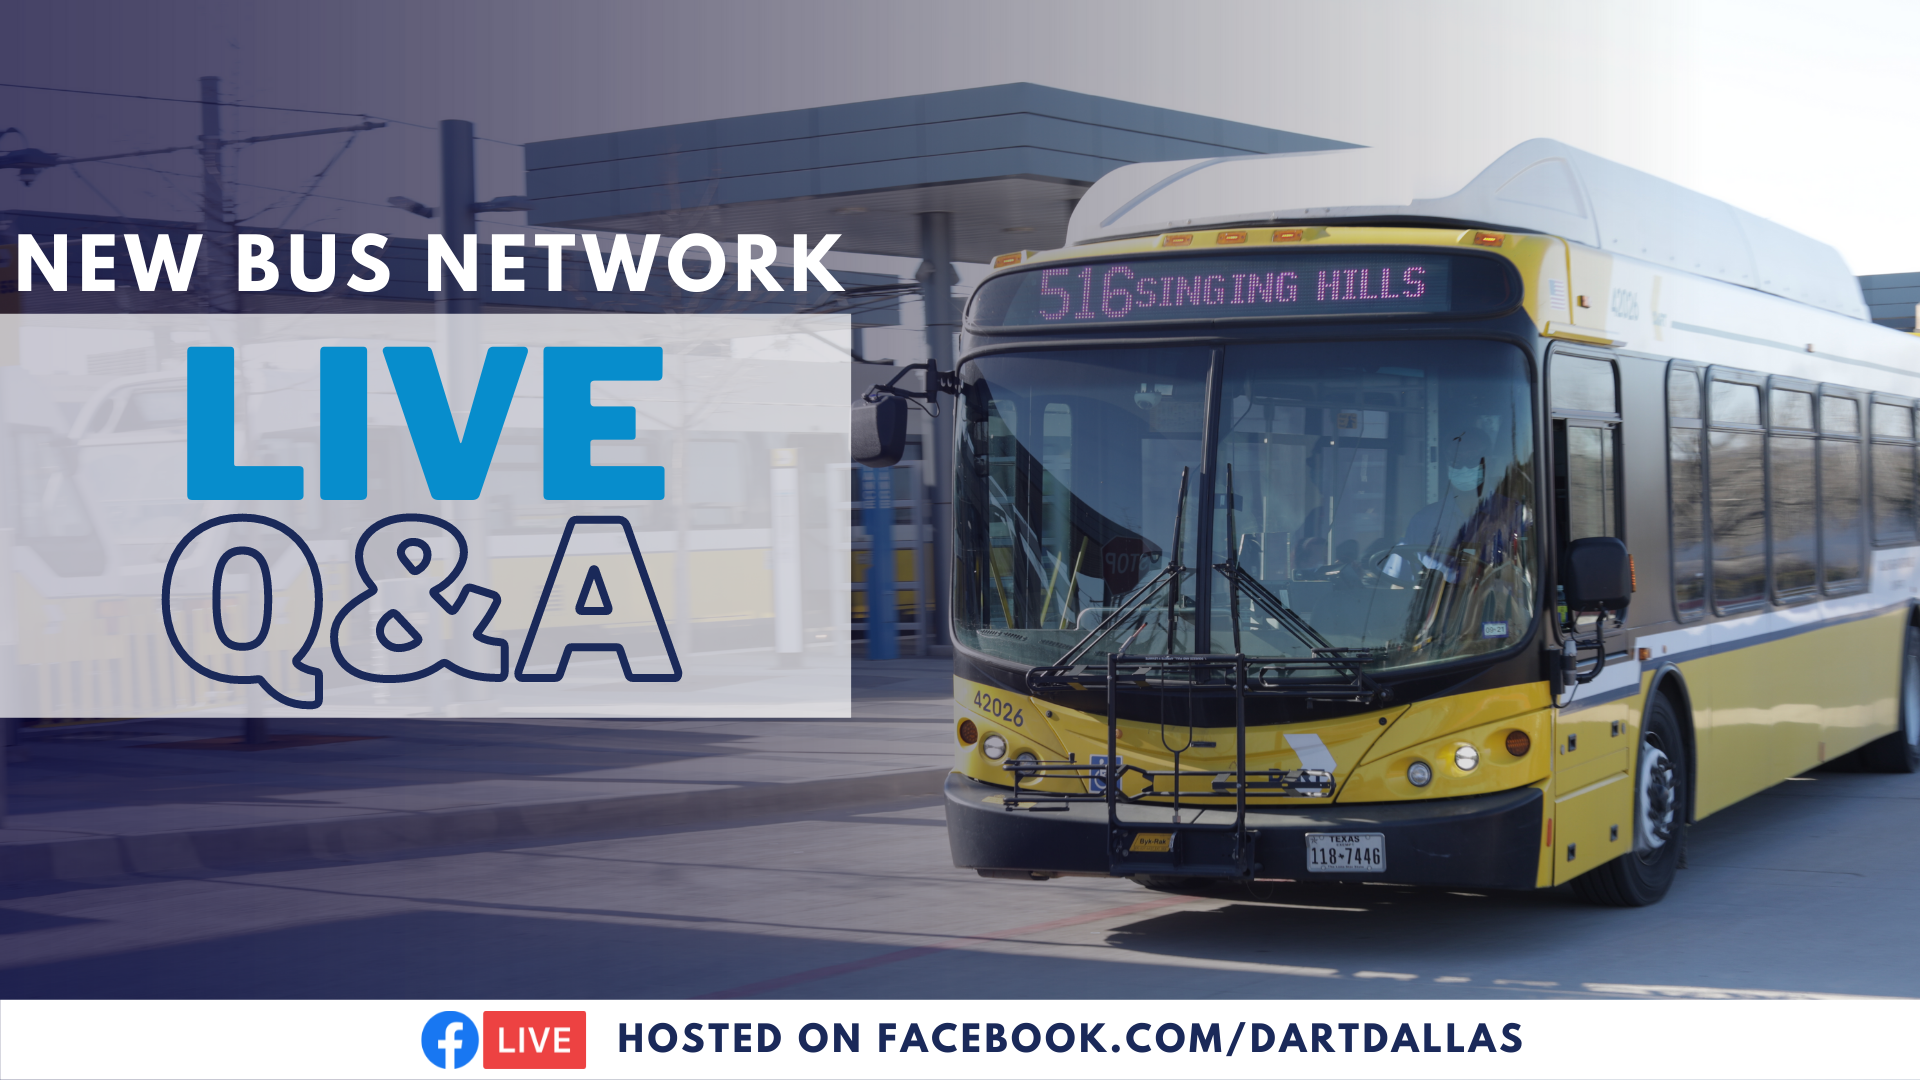 DART to host live Q&A on Facebook Live